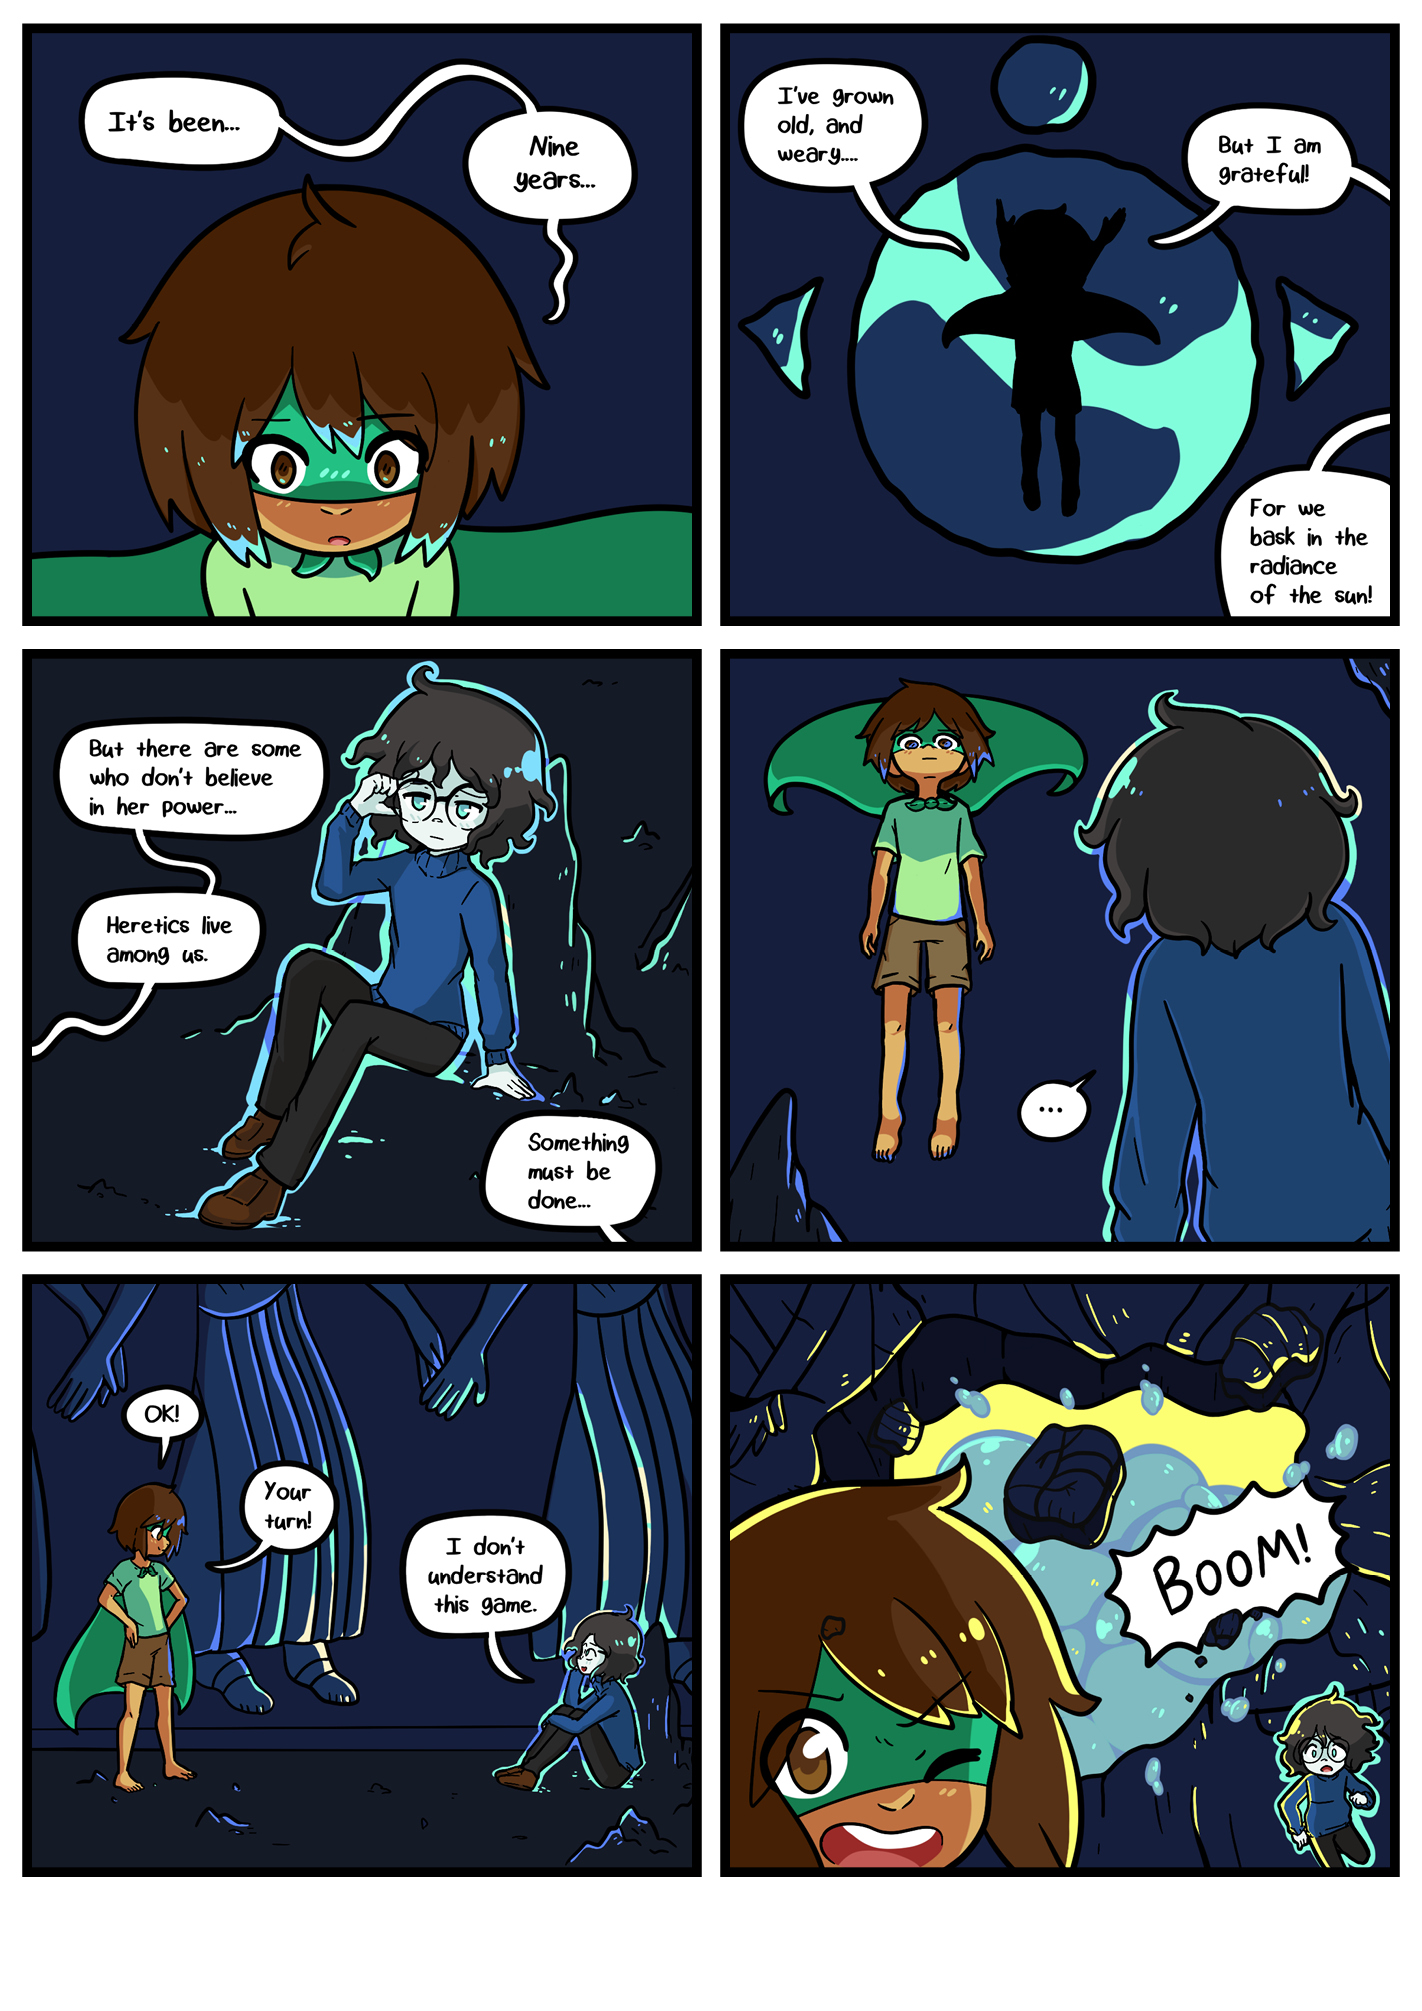 Seasick the underwater adventure comic, chapter 2 page 79 full page